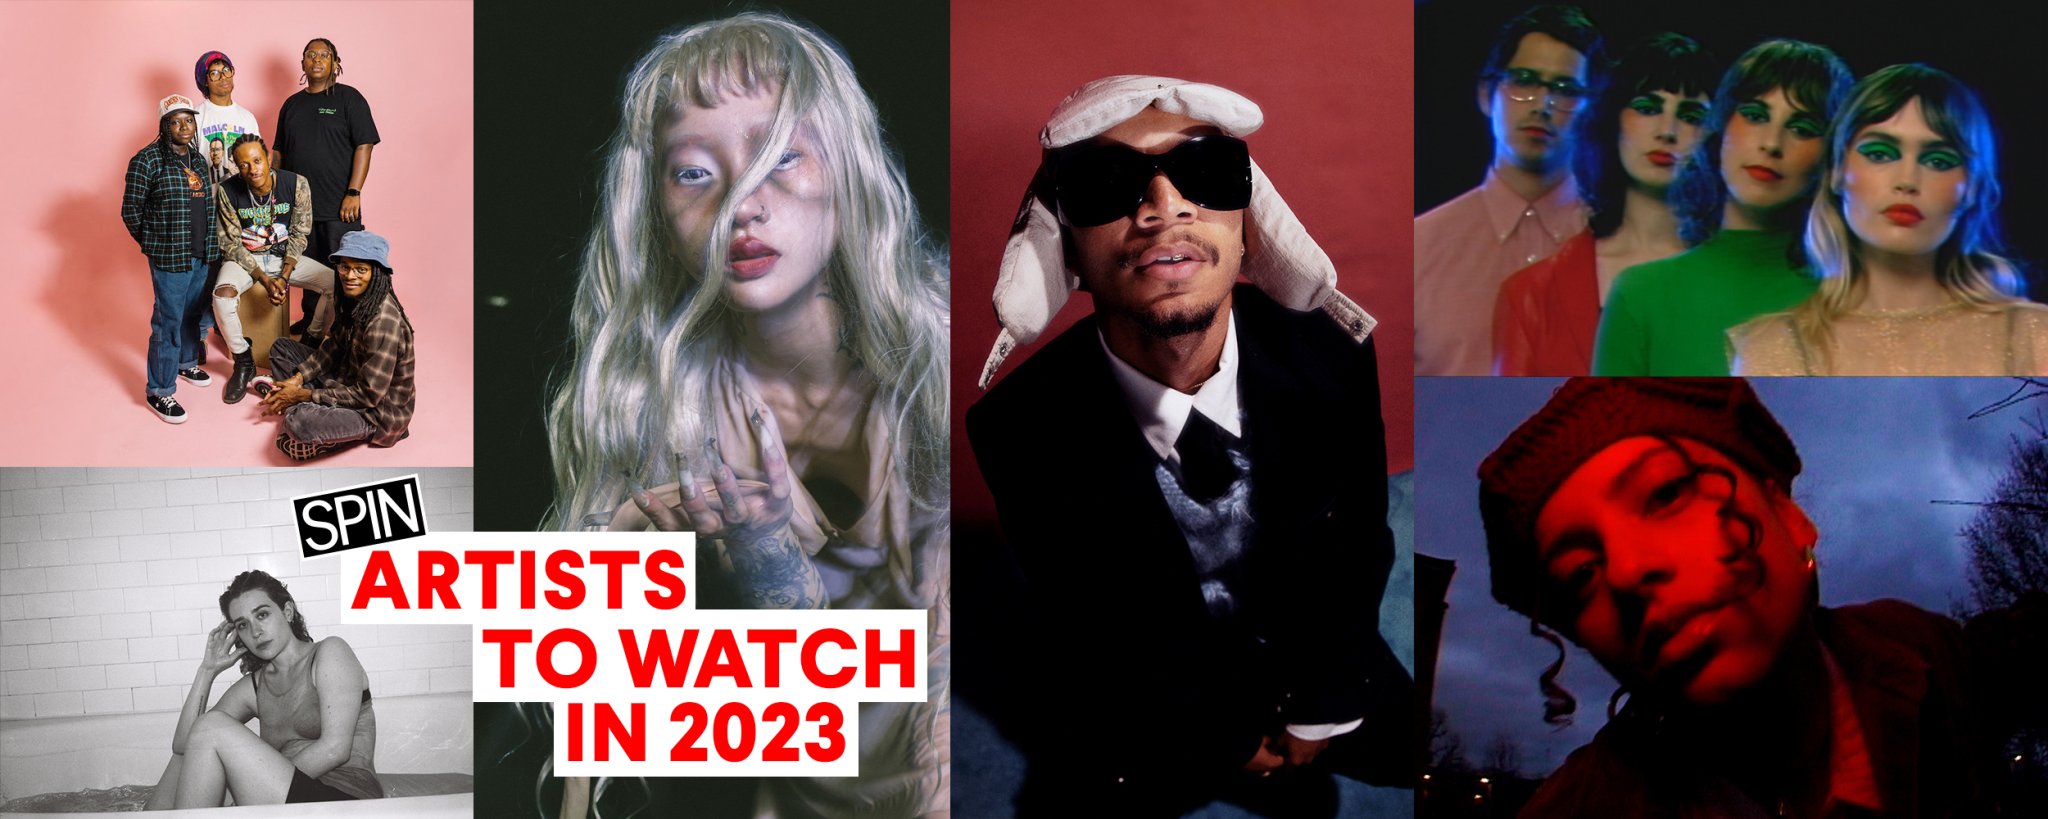 15 Artists to Watch in 2023 - SPIN